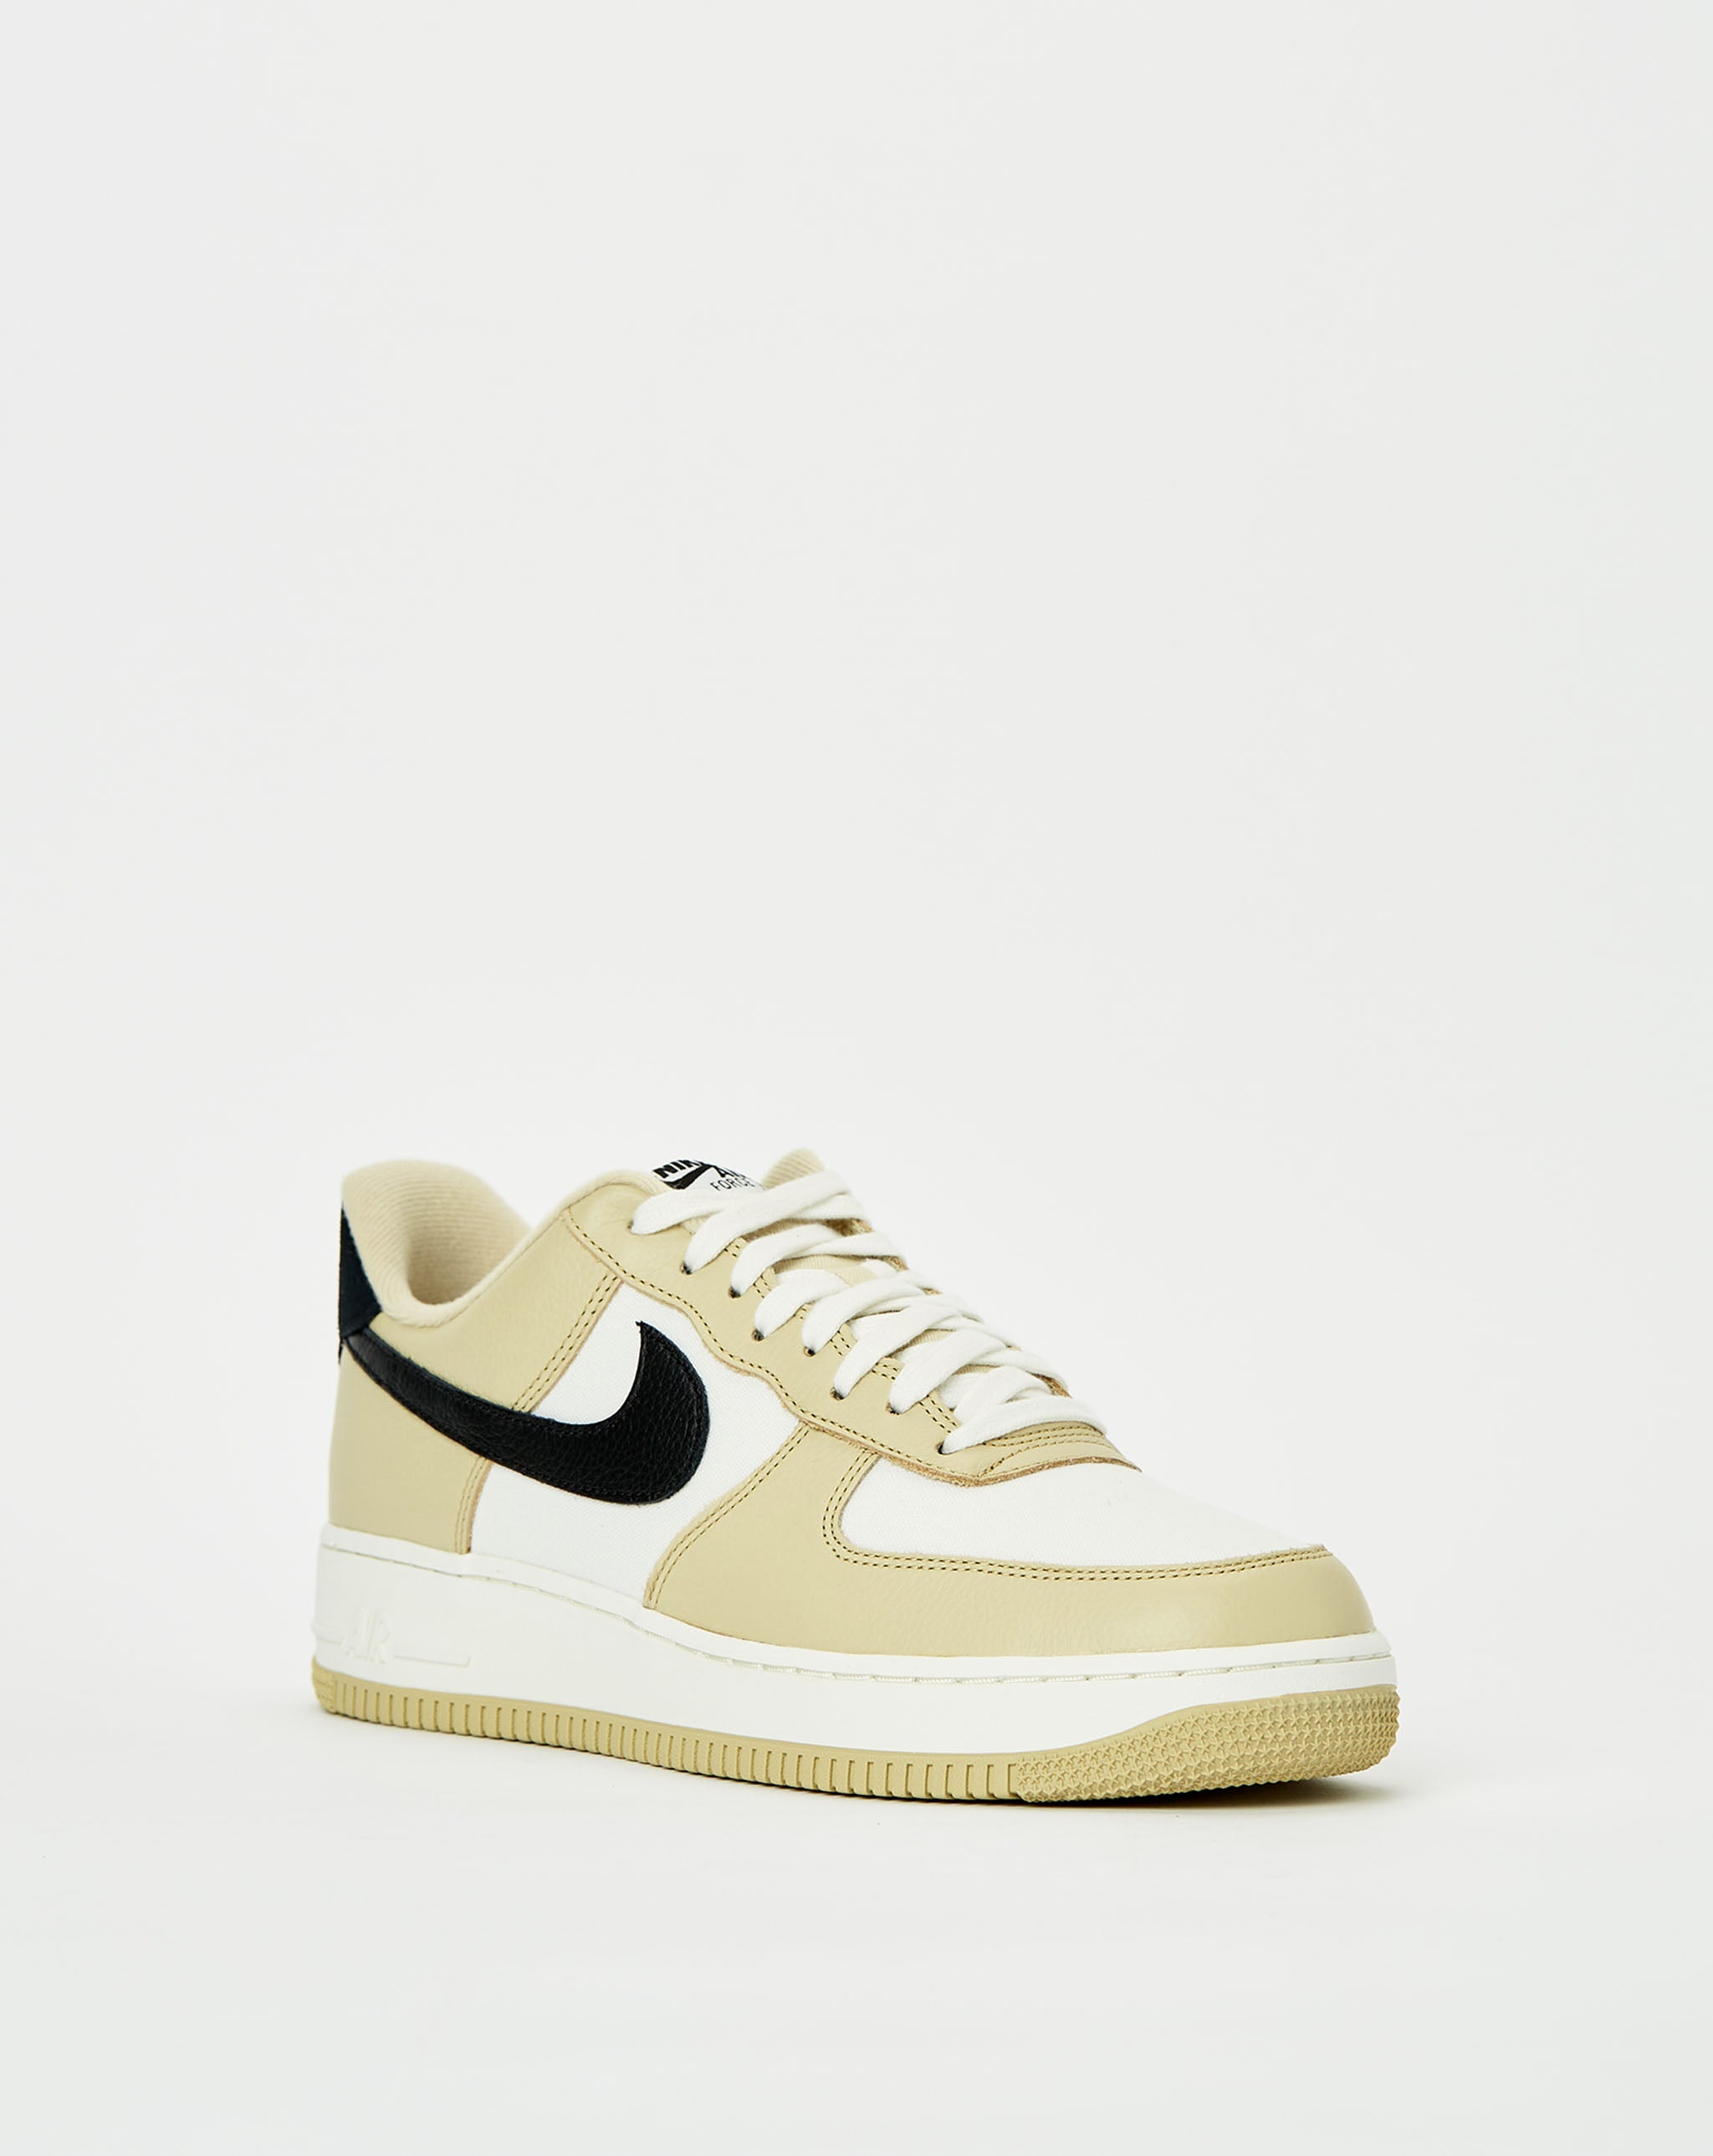 Hallo cement prieel Air Force 1 '07 – Rule of Next